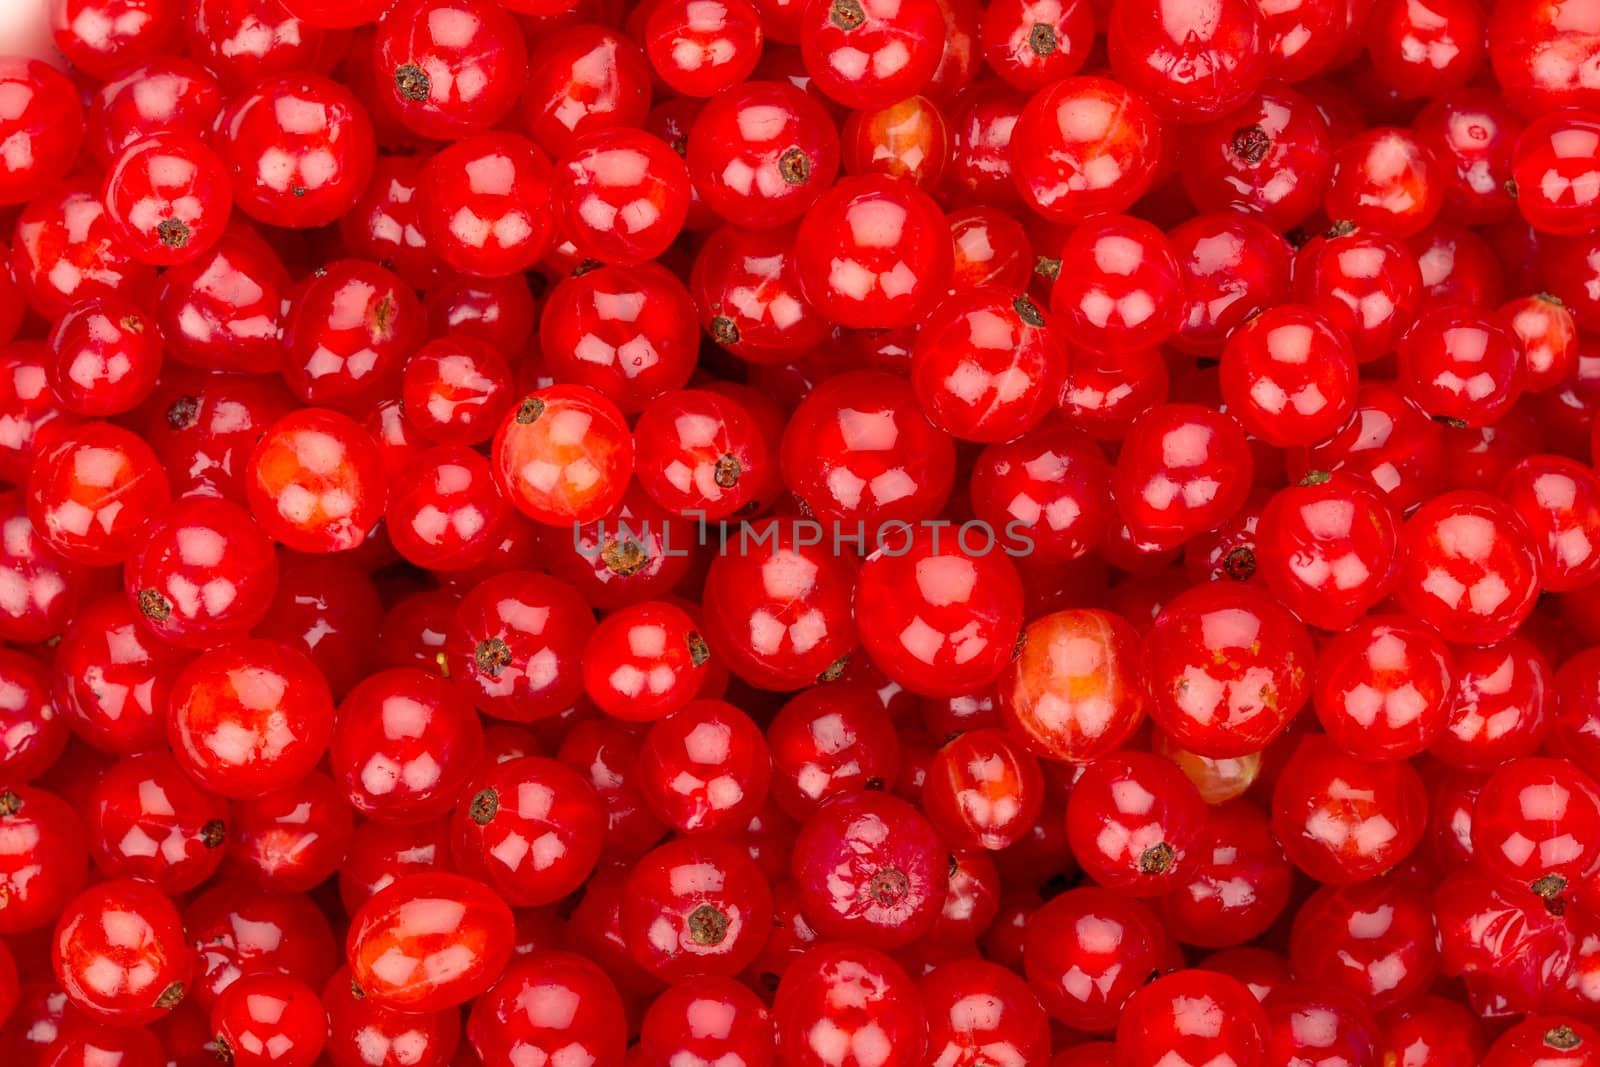 Red currant background. Close up of redcurrant fruits.